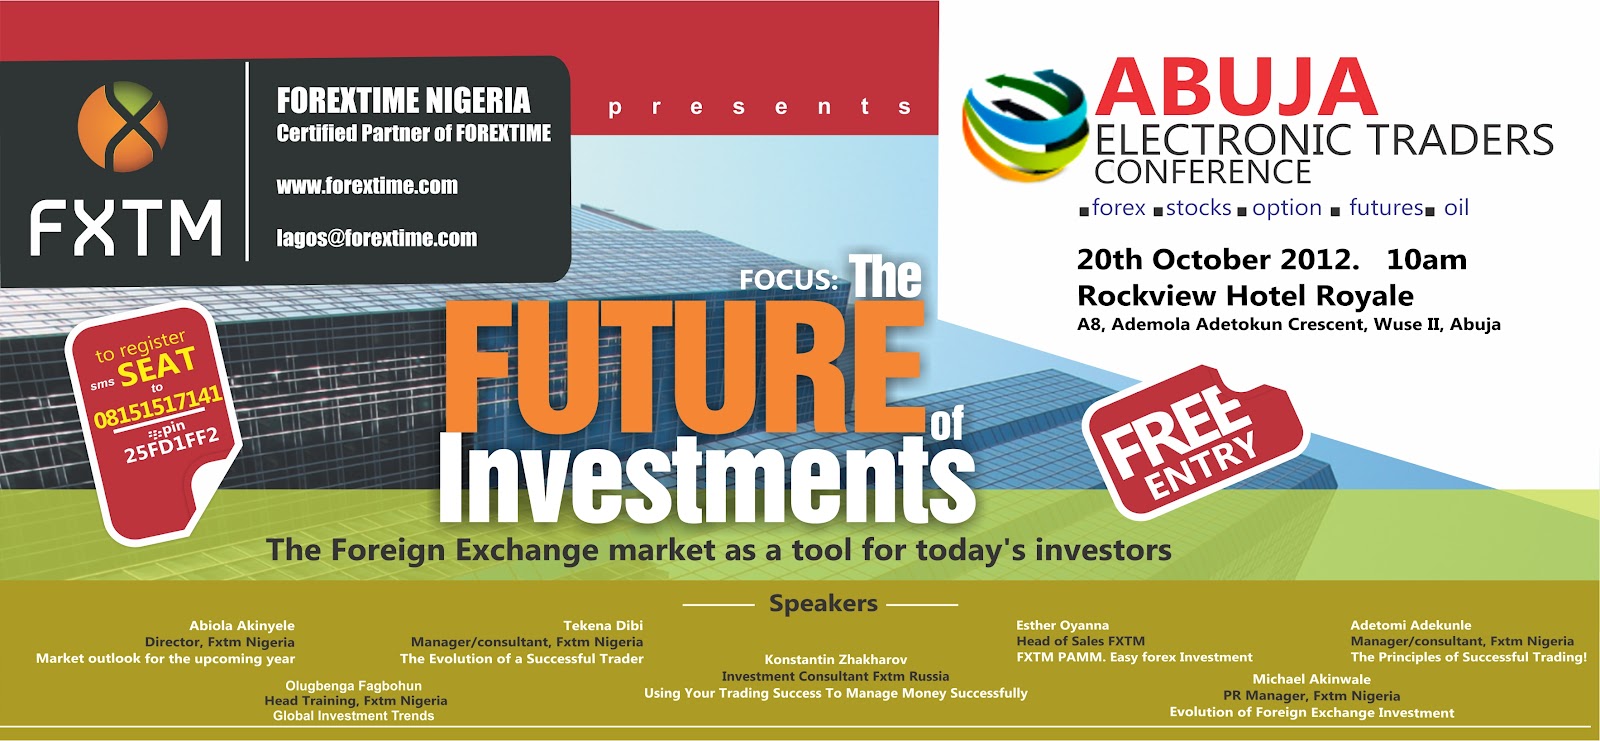 Forextime Nigeria Events - 